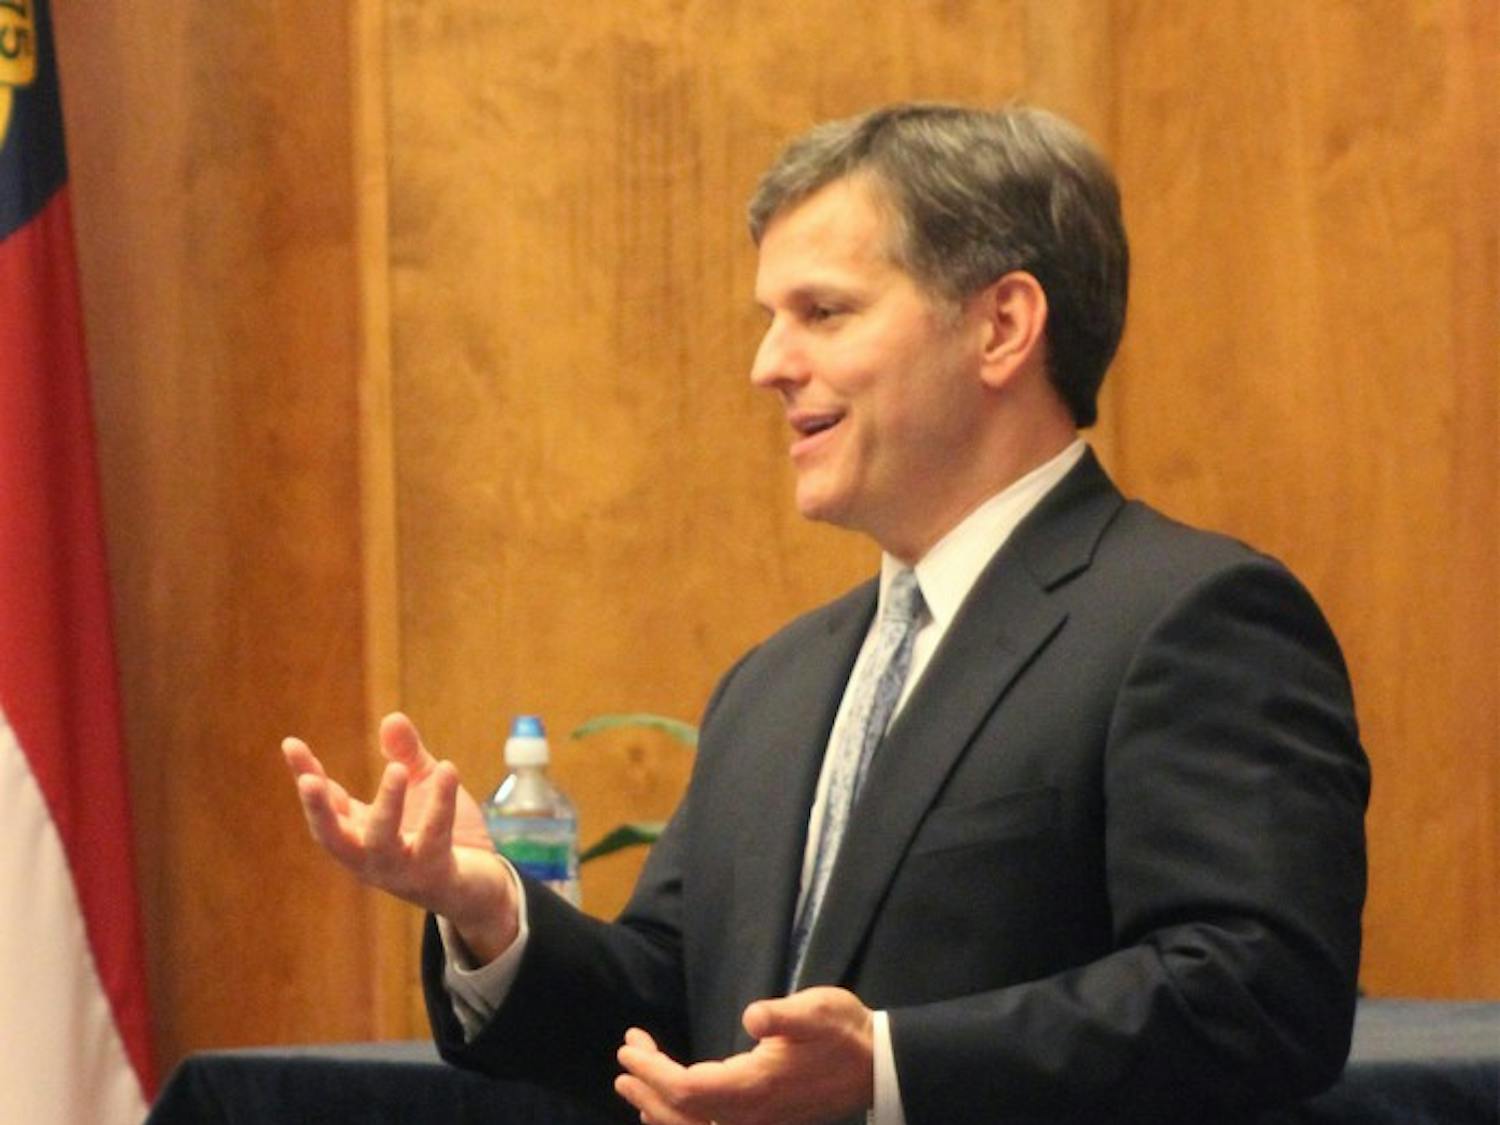 UNC Hillel and the Education Committee hosted Senator Josh Stein, a leading North Carolina Politician to speak about being Jewish in the North Carolina political scene. 

"The way we are going to succeed is having an educated workforce."